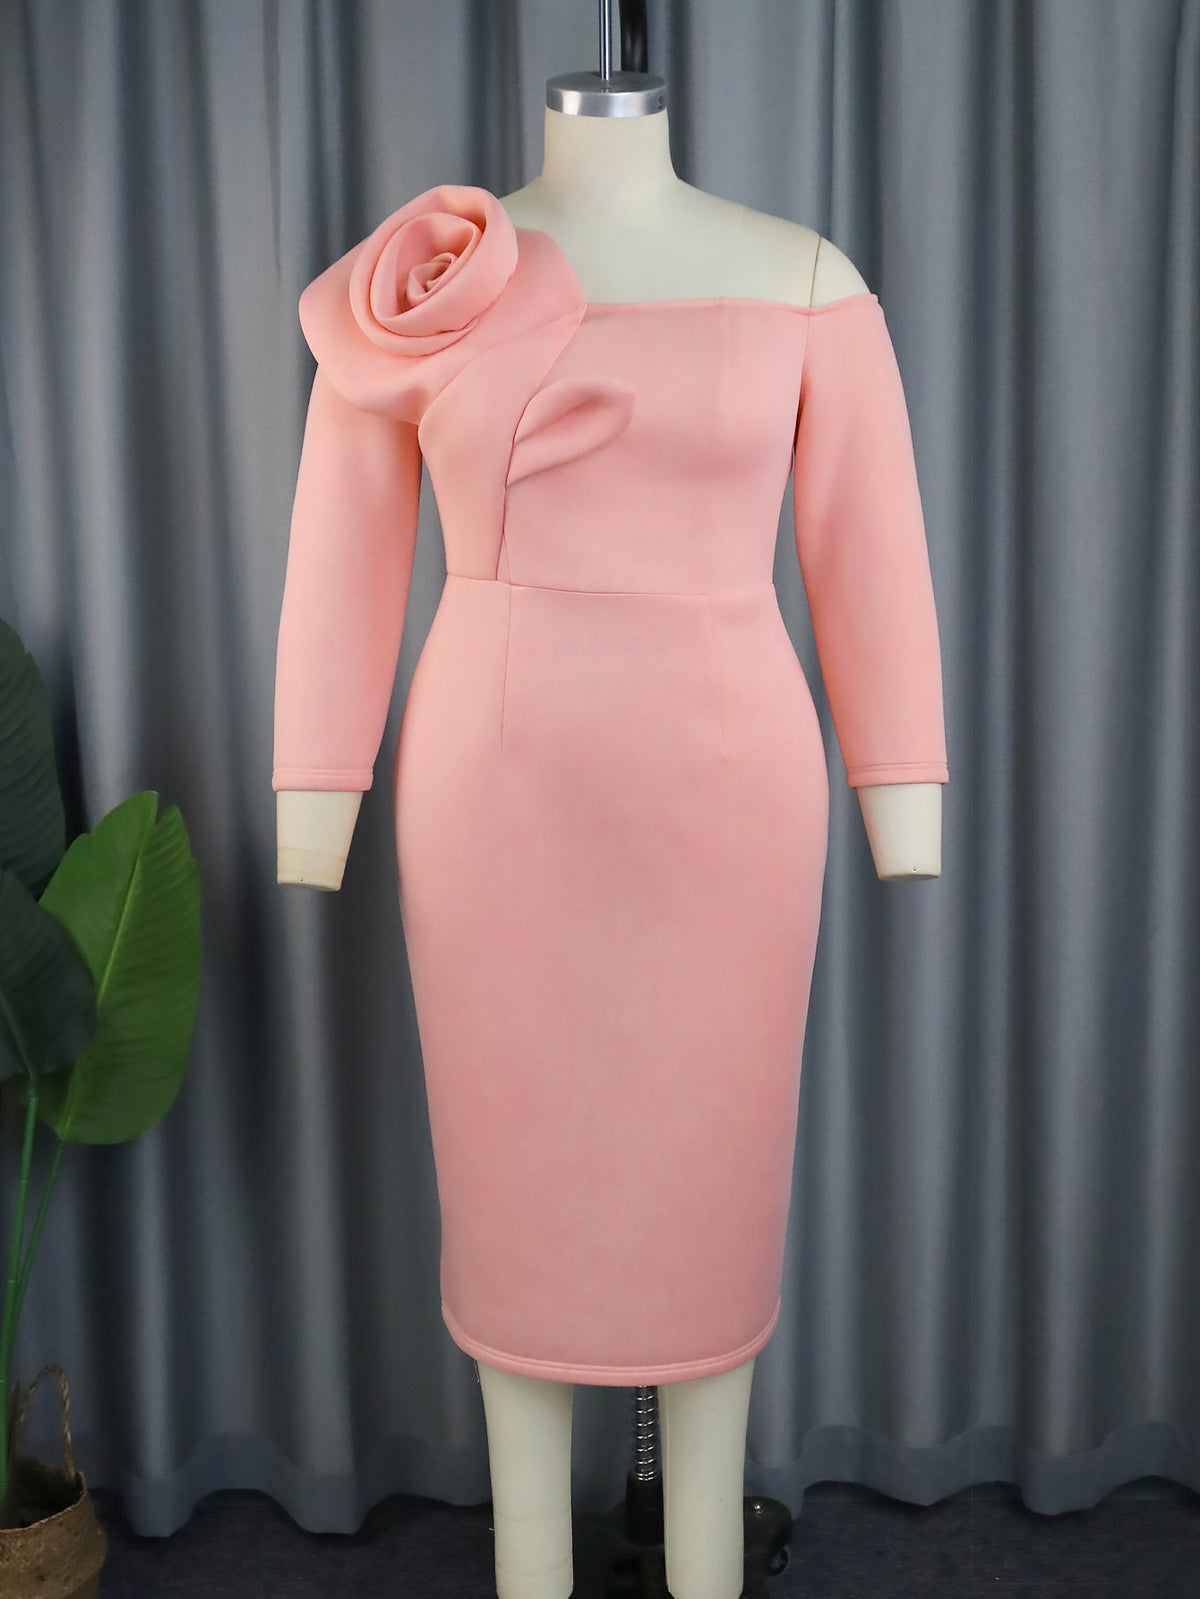 Cold Shoulder Dresses Pink Wrist Sleeve Flower Bodycon Large Size Women Evening Event Party Midi Gowns Outfits 3XL 4XL